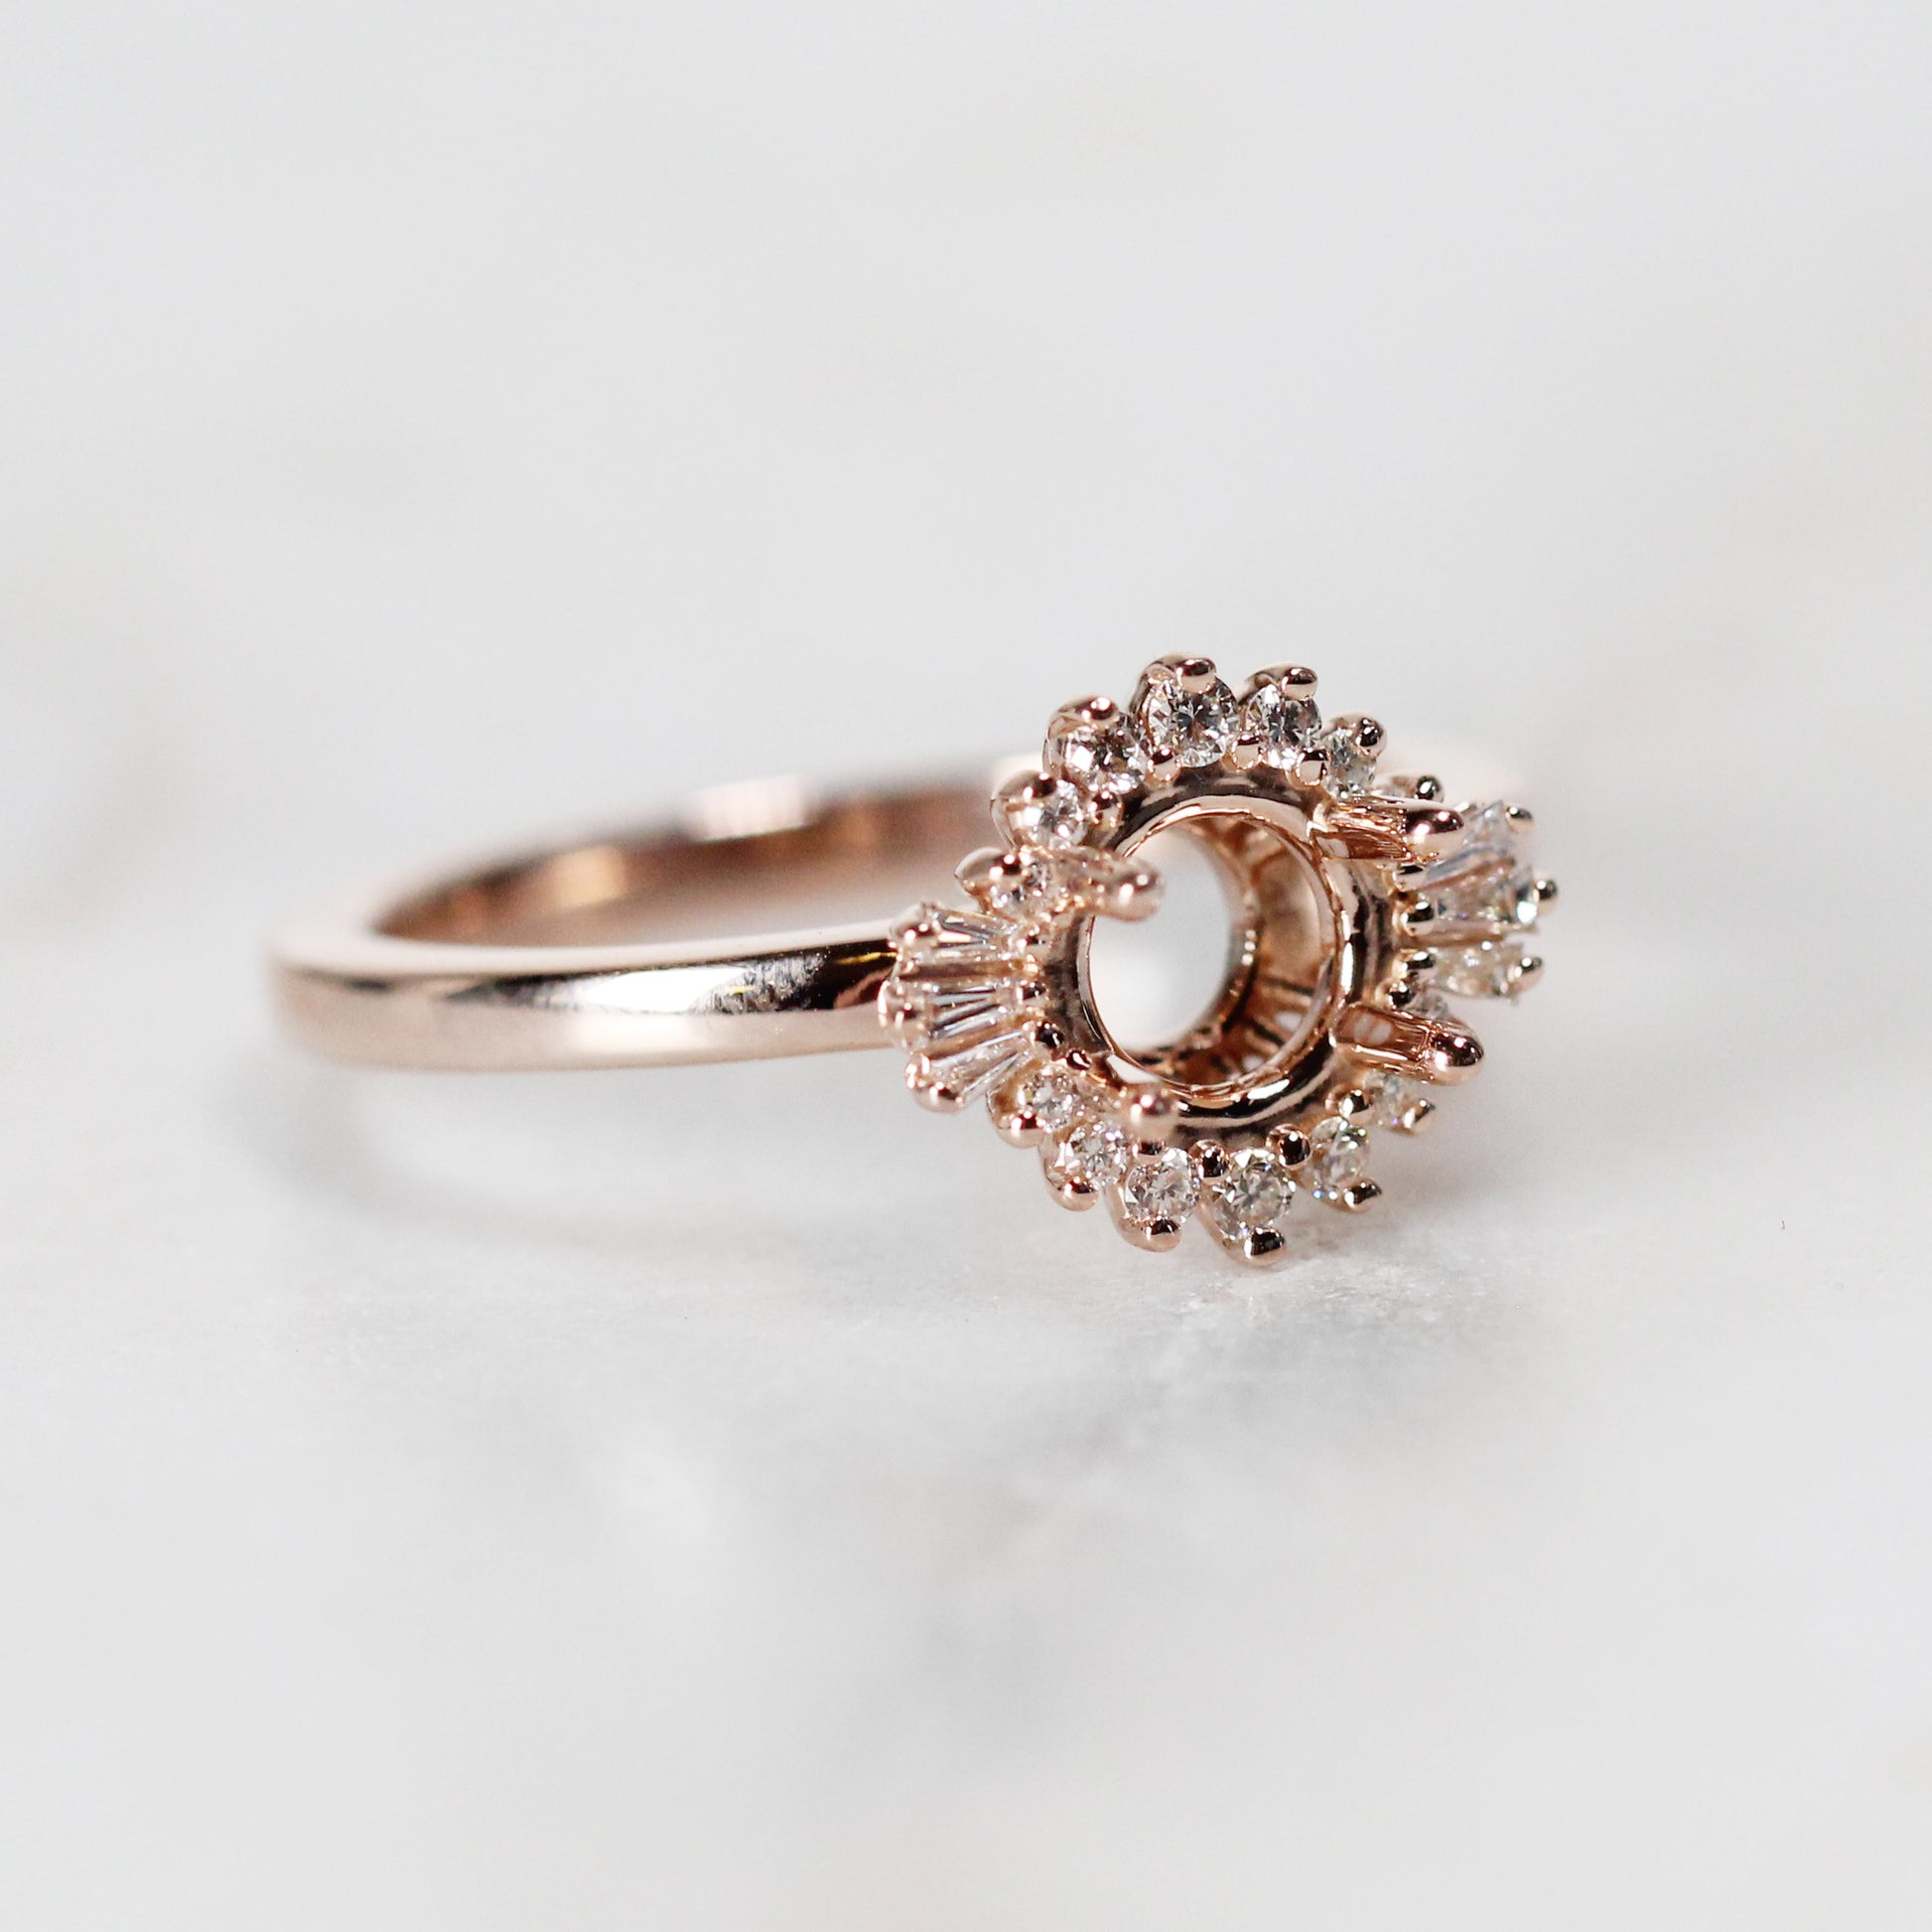 Dean Setting - Midwinter Co. Alternative Bridal Rings and Modern Fine Jewelry